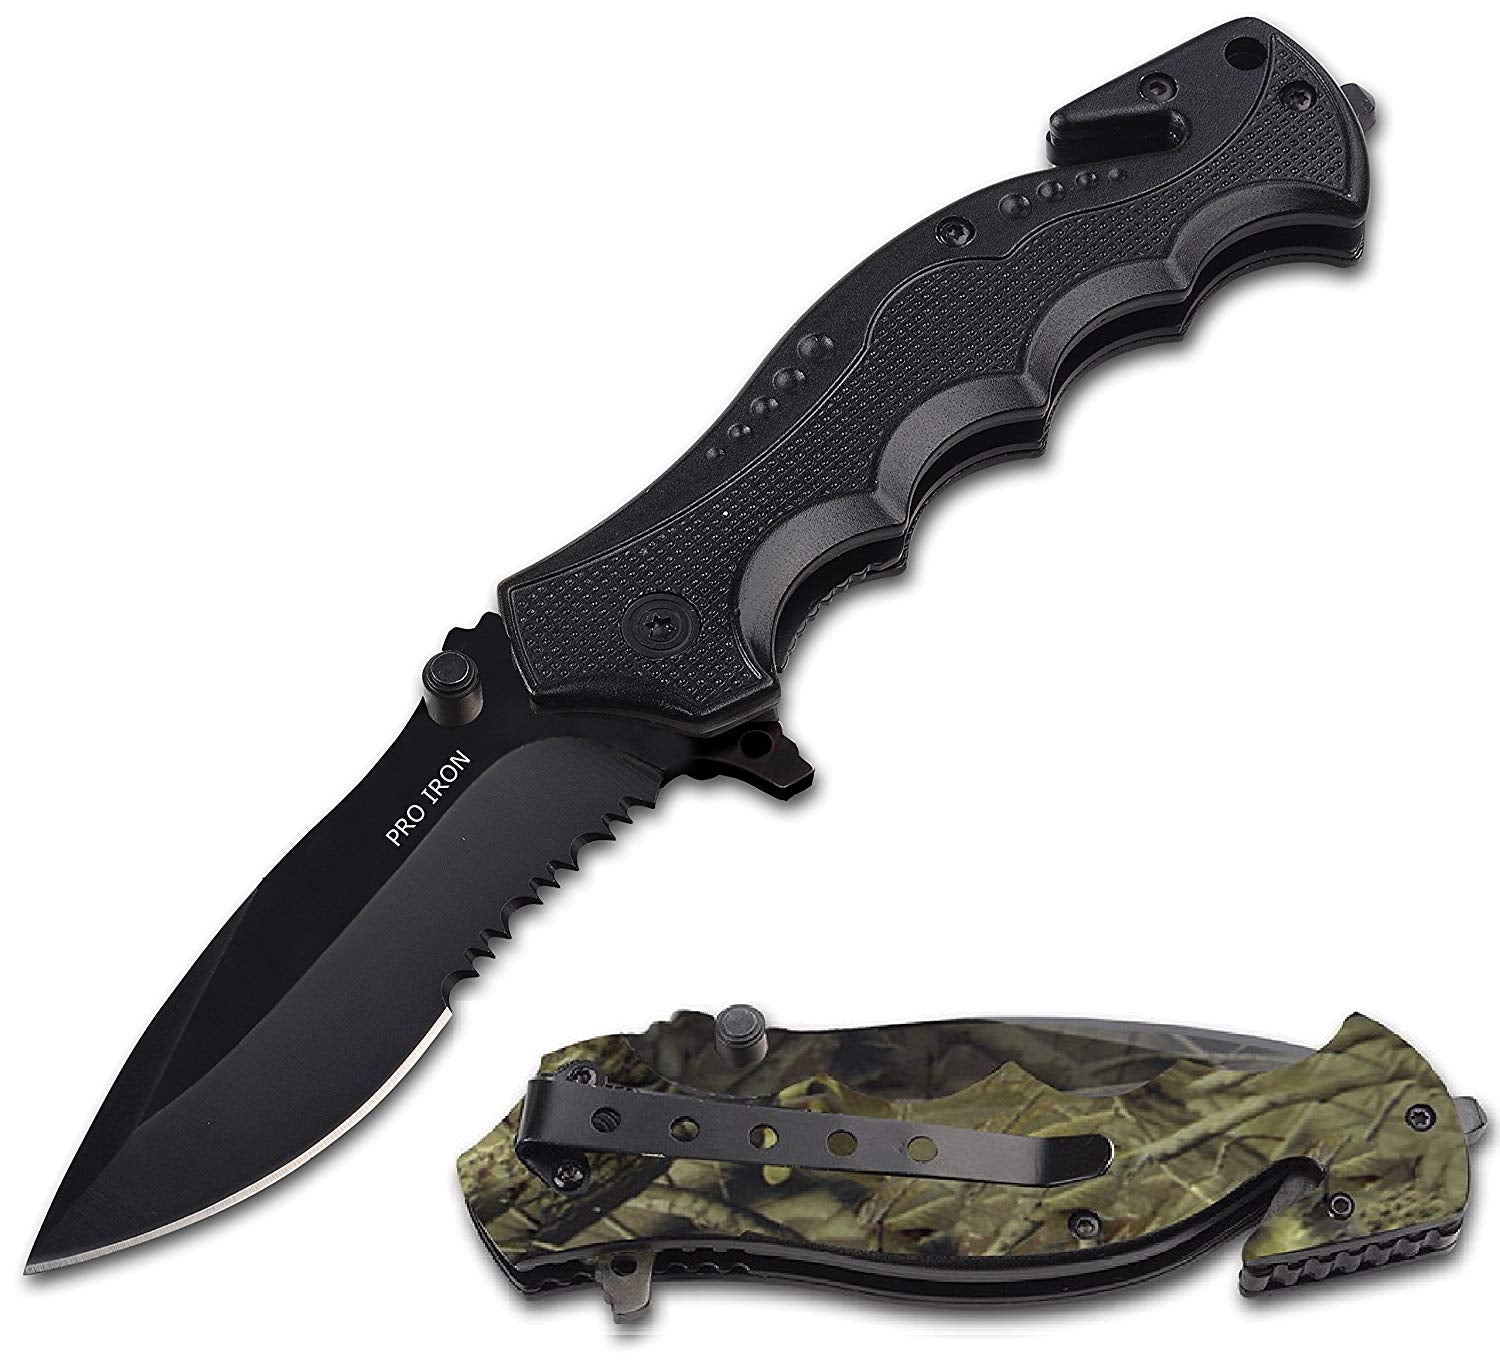 Serrated Edge Outdoor Survival Camping Hunting Knife - 2 Knives - Woodsman-Camo + Black